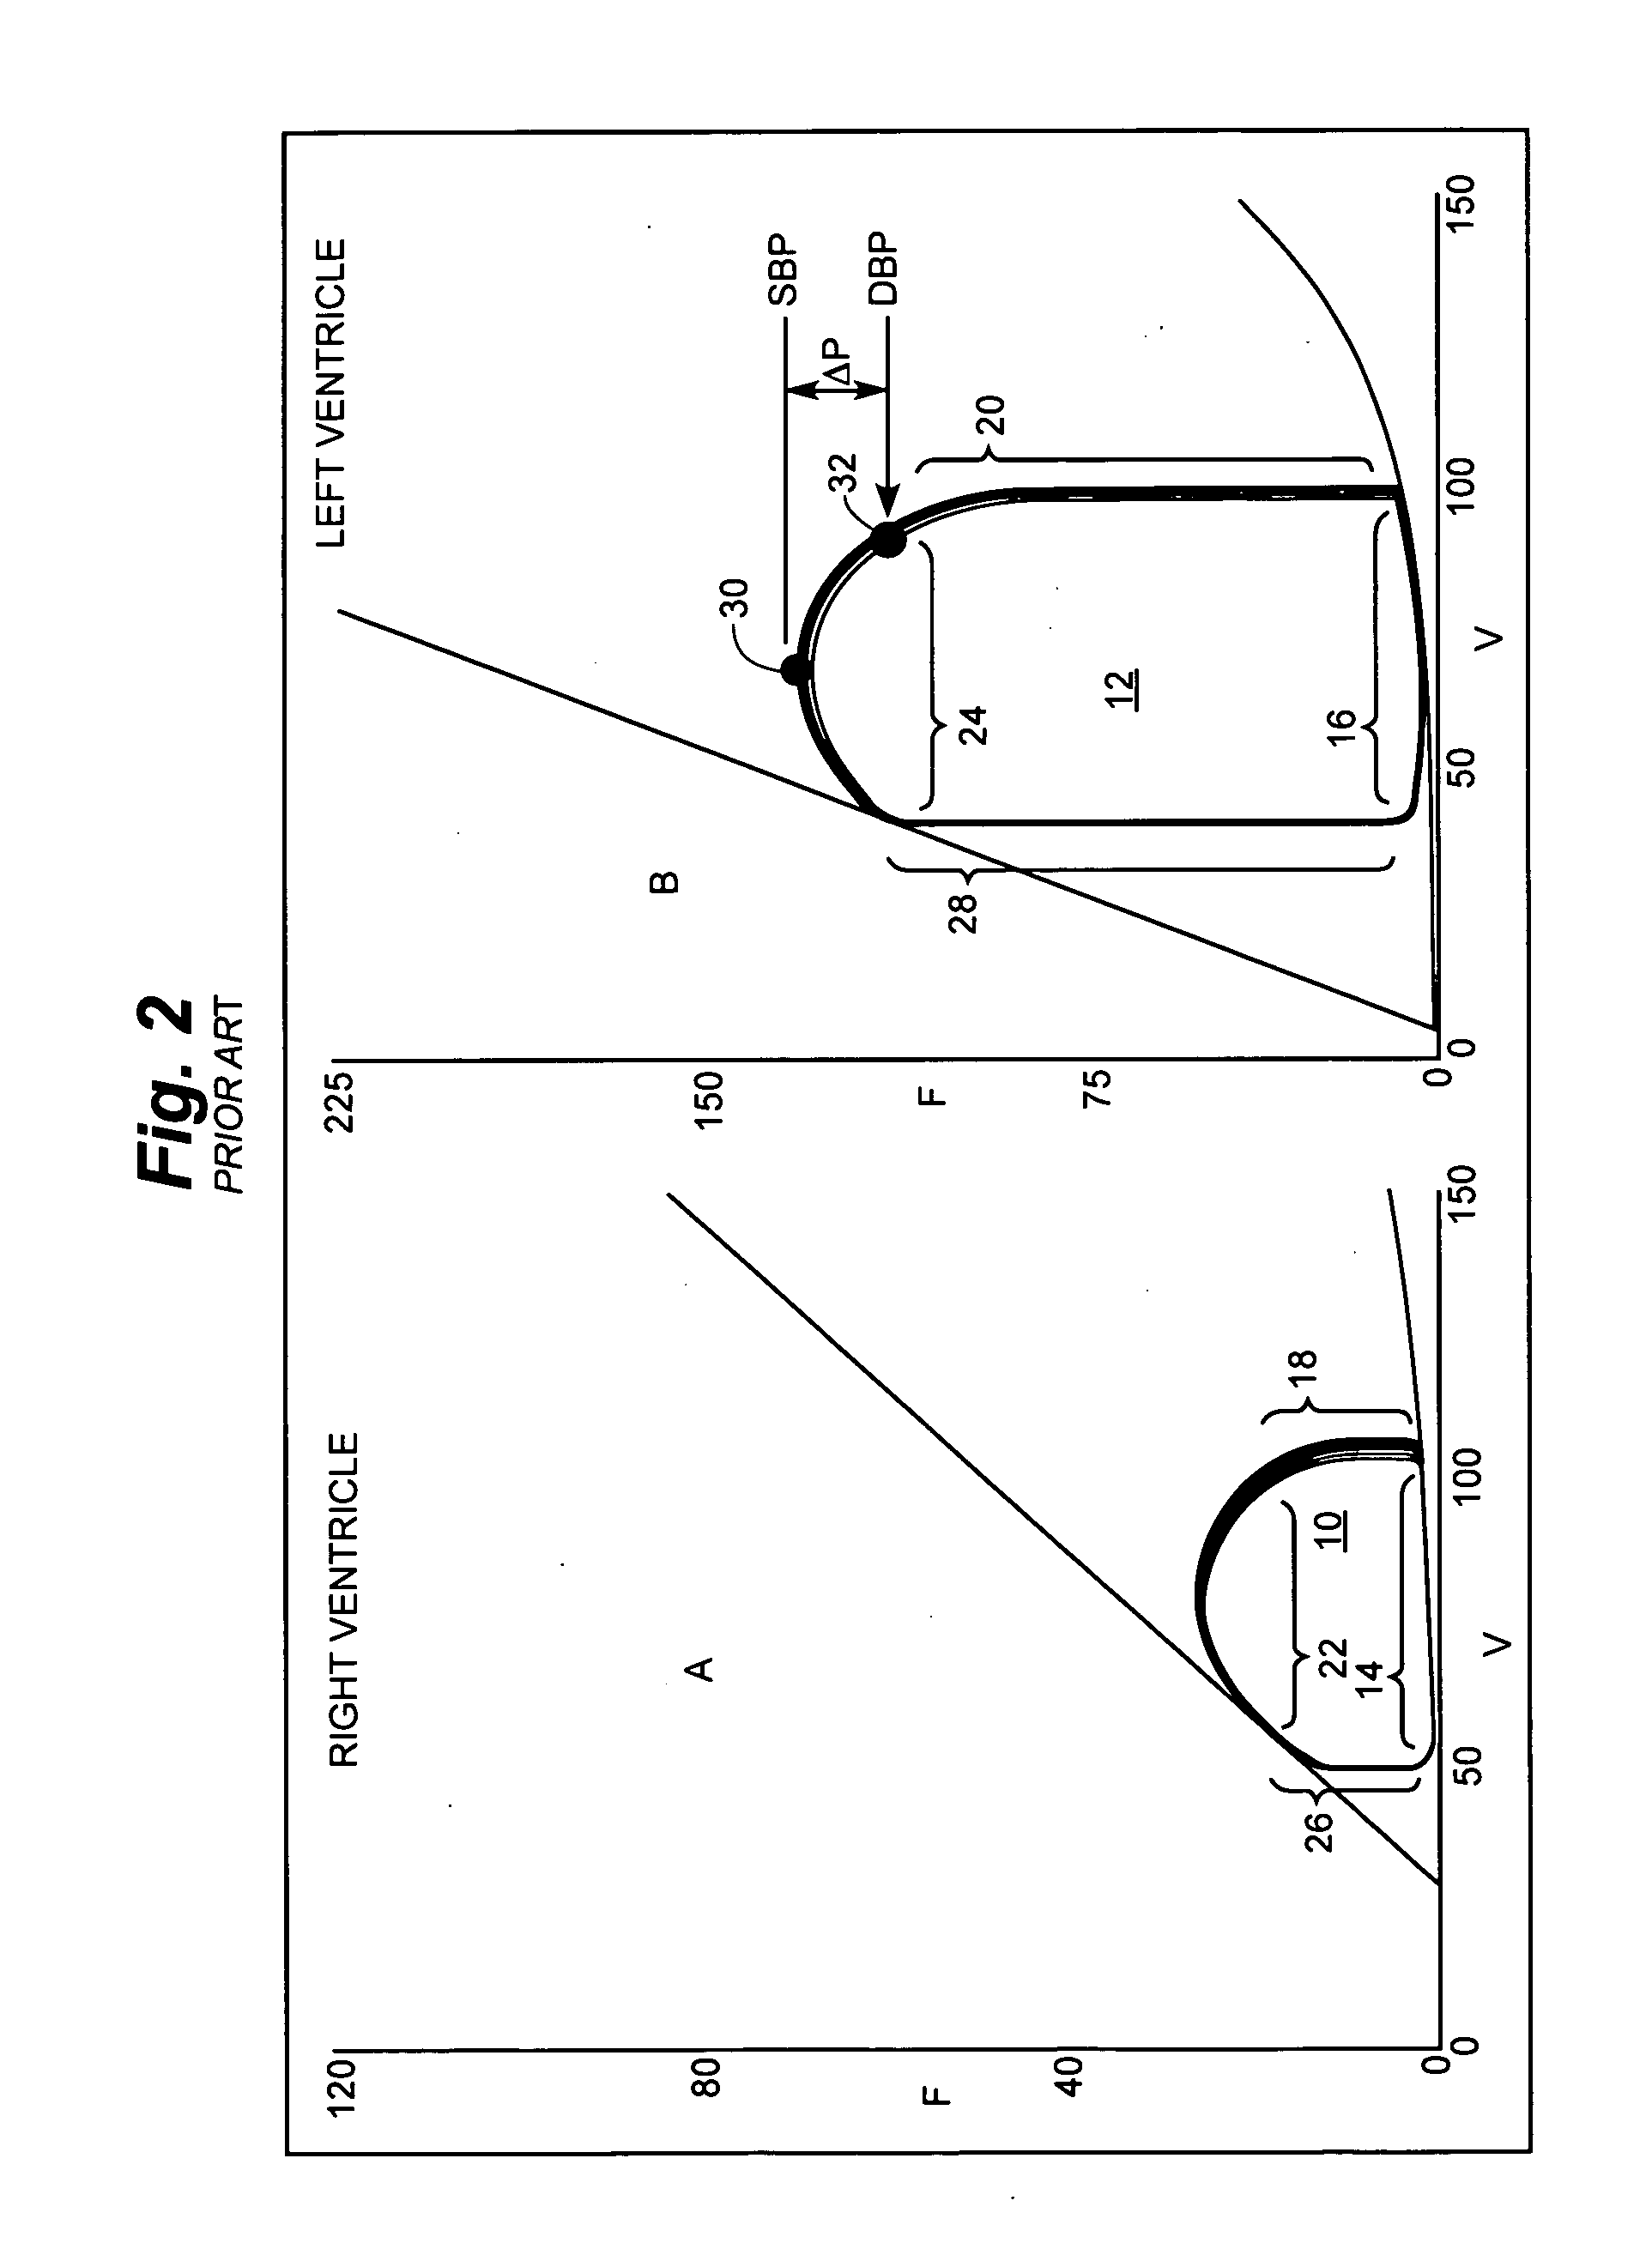 Cardiac stimulation apparatus and method for the control of hypertension